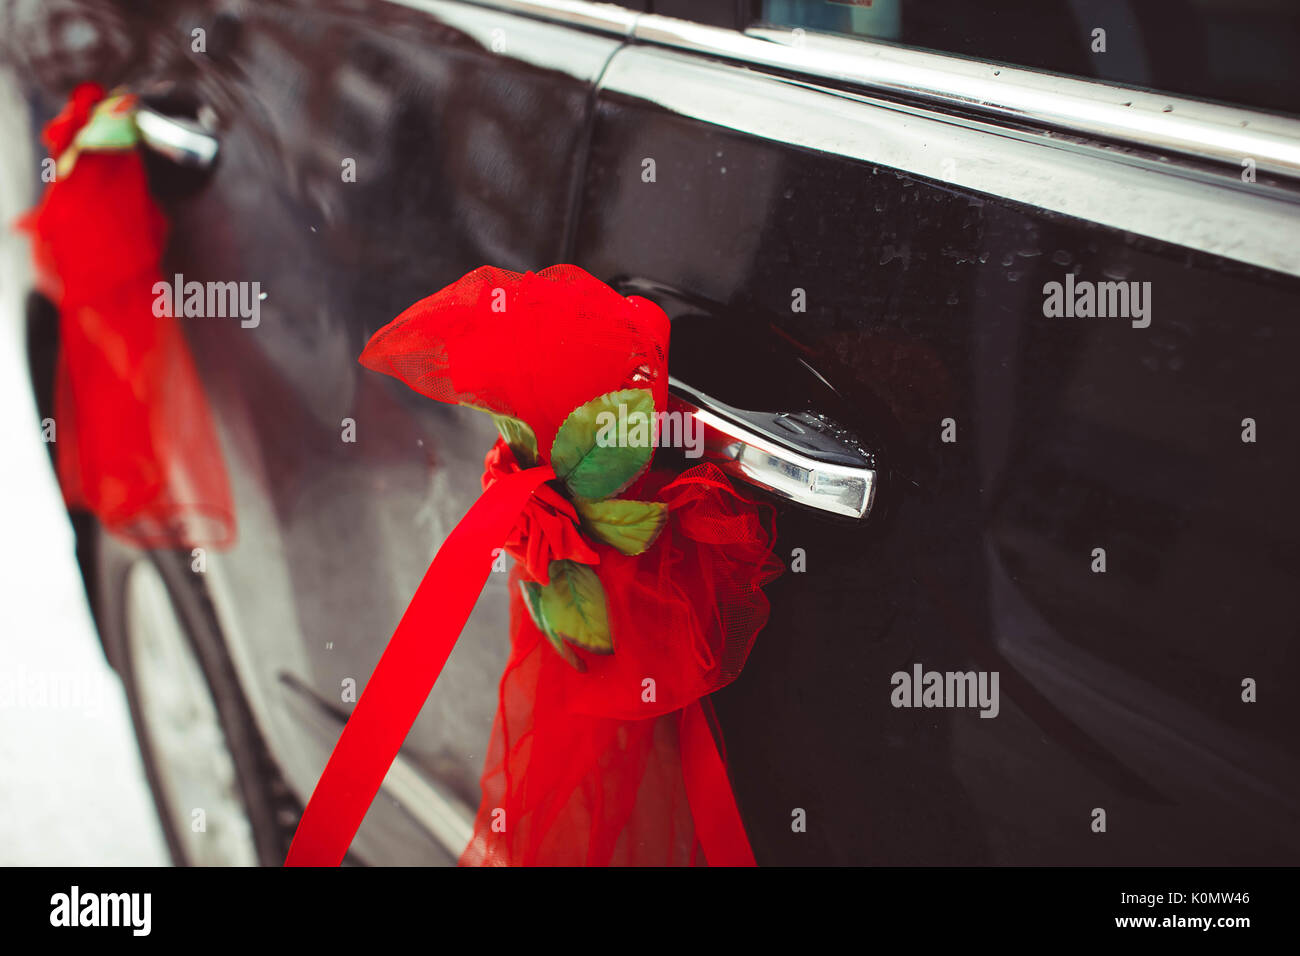 Wedding car decoration on the current tradition Stock Photo - Alamy